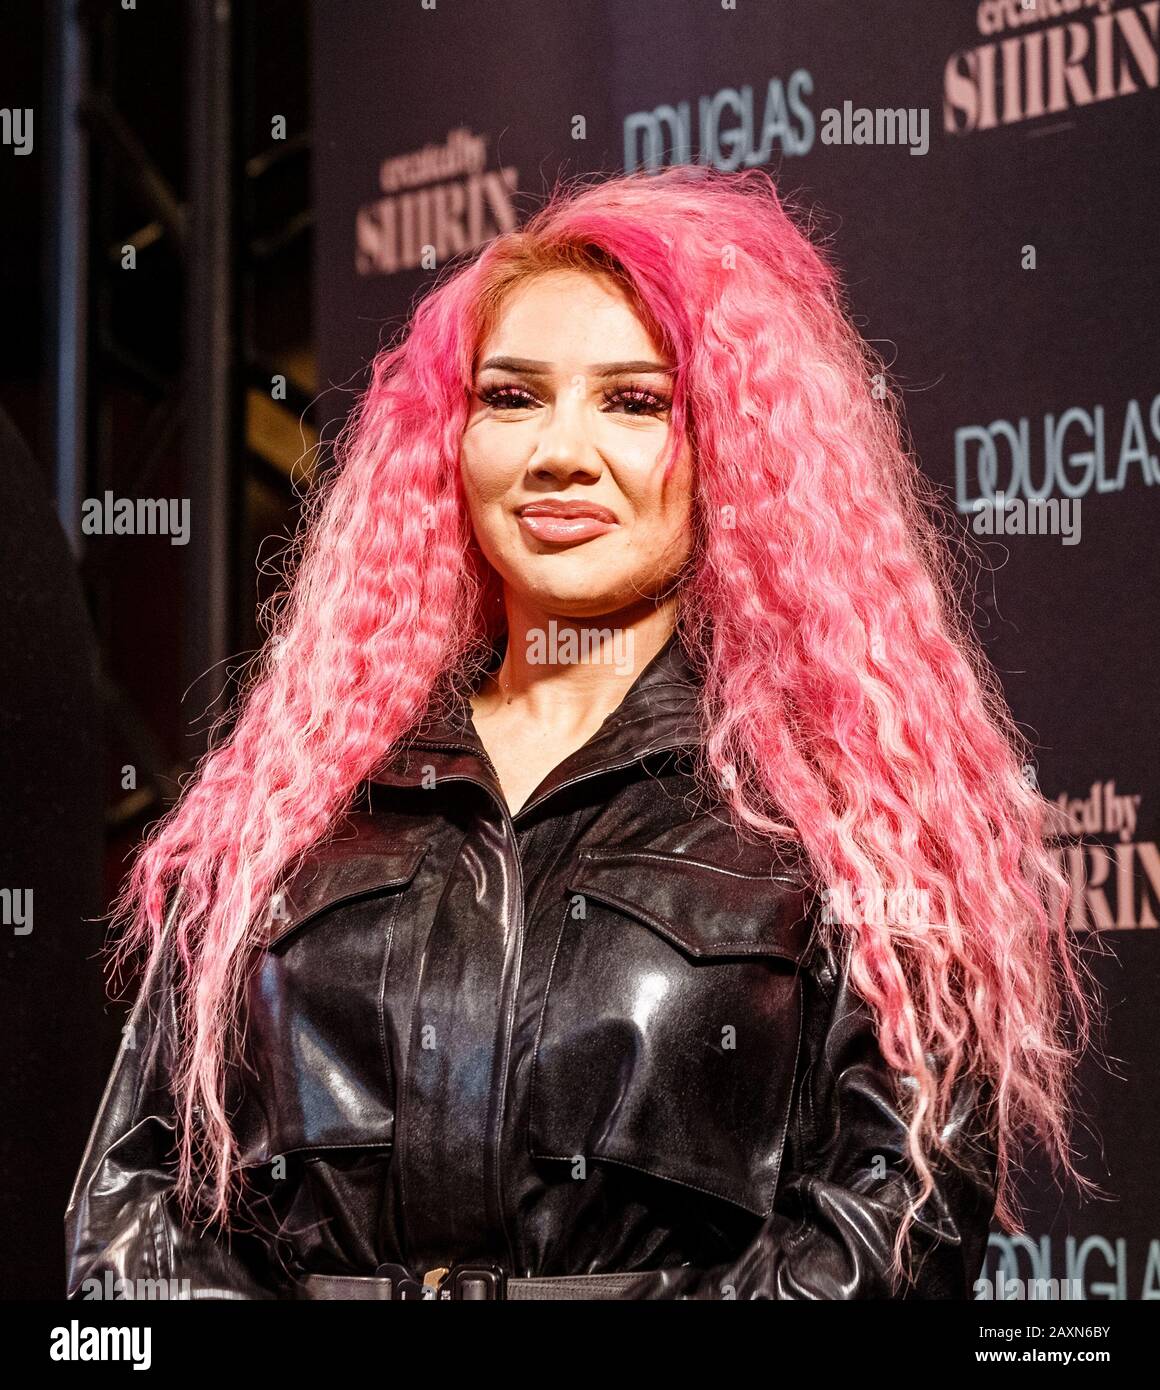 Hamburg, Germany. 12th Feb, 2020. Shirin David, German YouTuberin, singer  and rapper, stands on the stage of a shopping centre during the  presentation of the eau de parfum "Created by Shirin", which